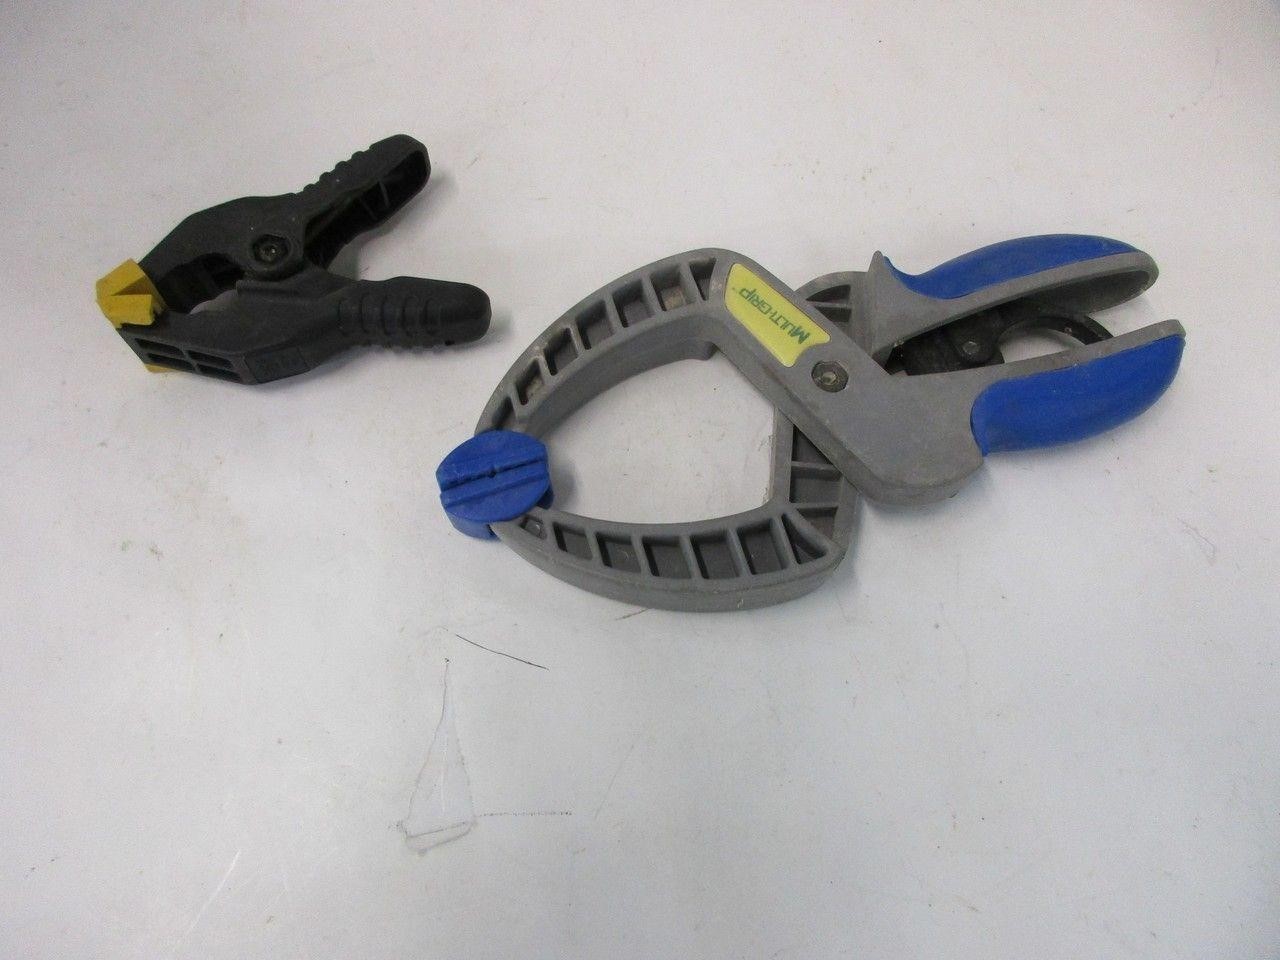 Pair of ratcheting clamps - 1 small